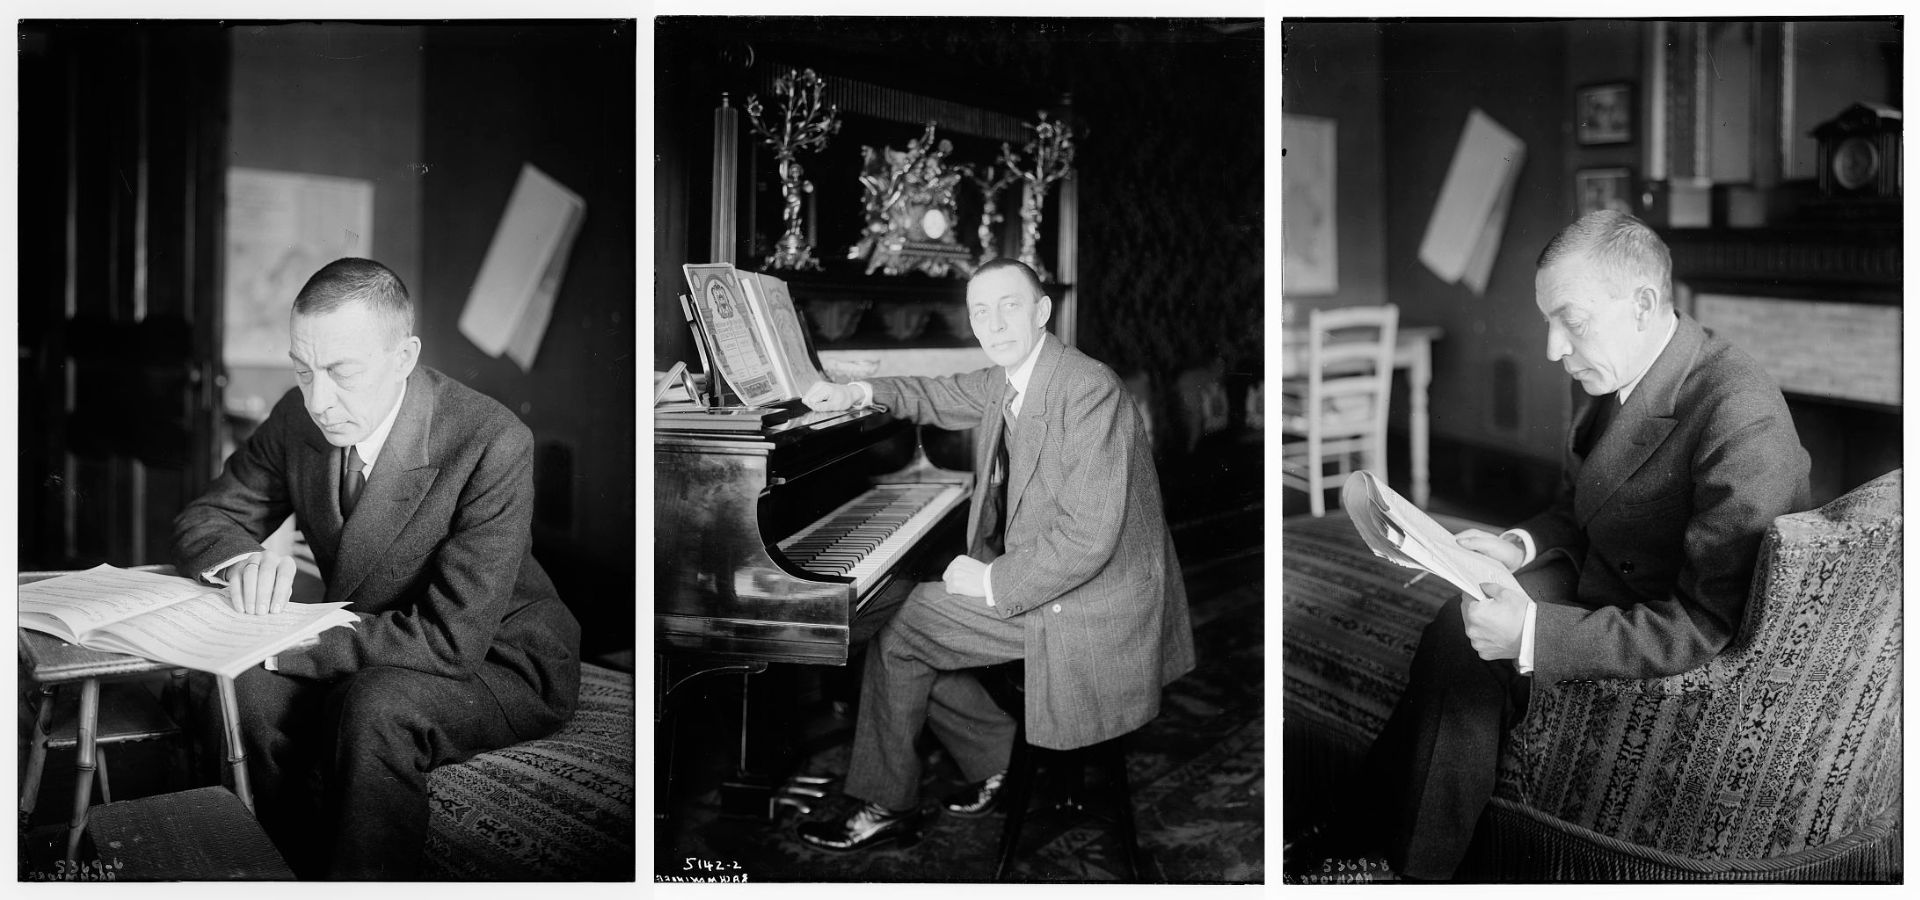 Three photos of Sergei Rachmaninoff sitting at the piano or composing music, courtesy of the Library of Congress